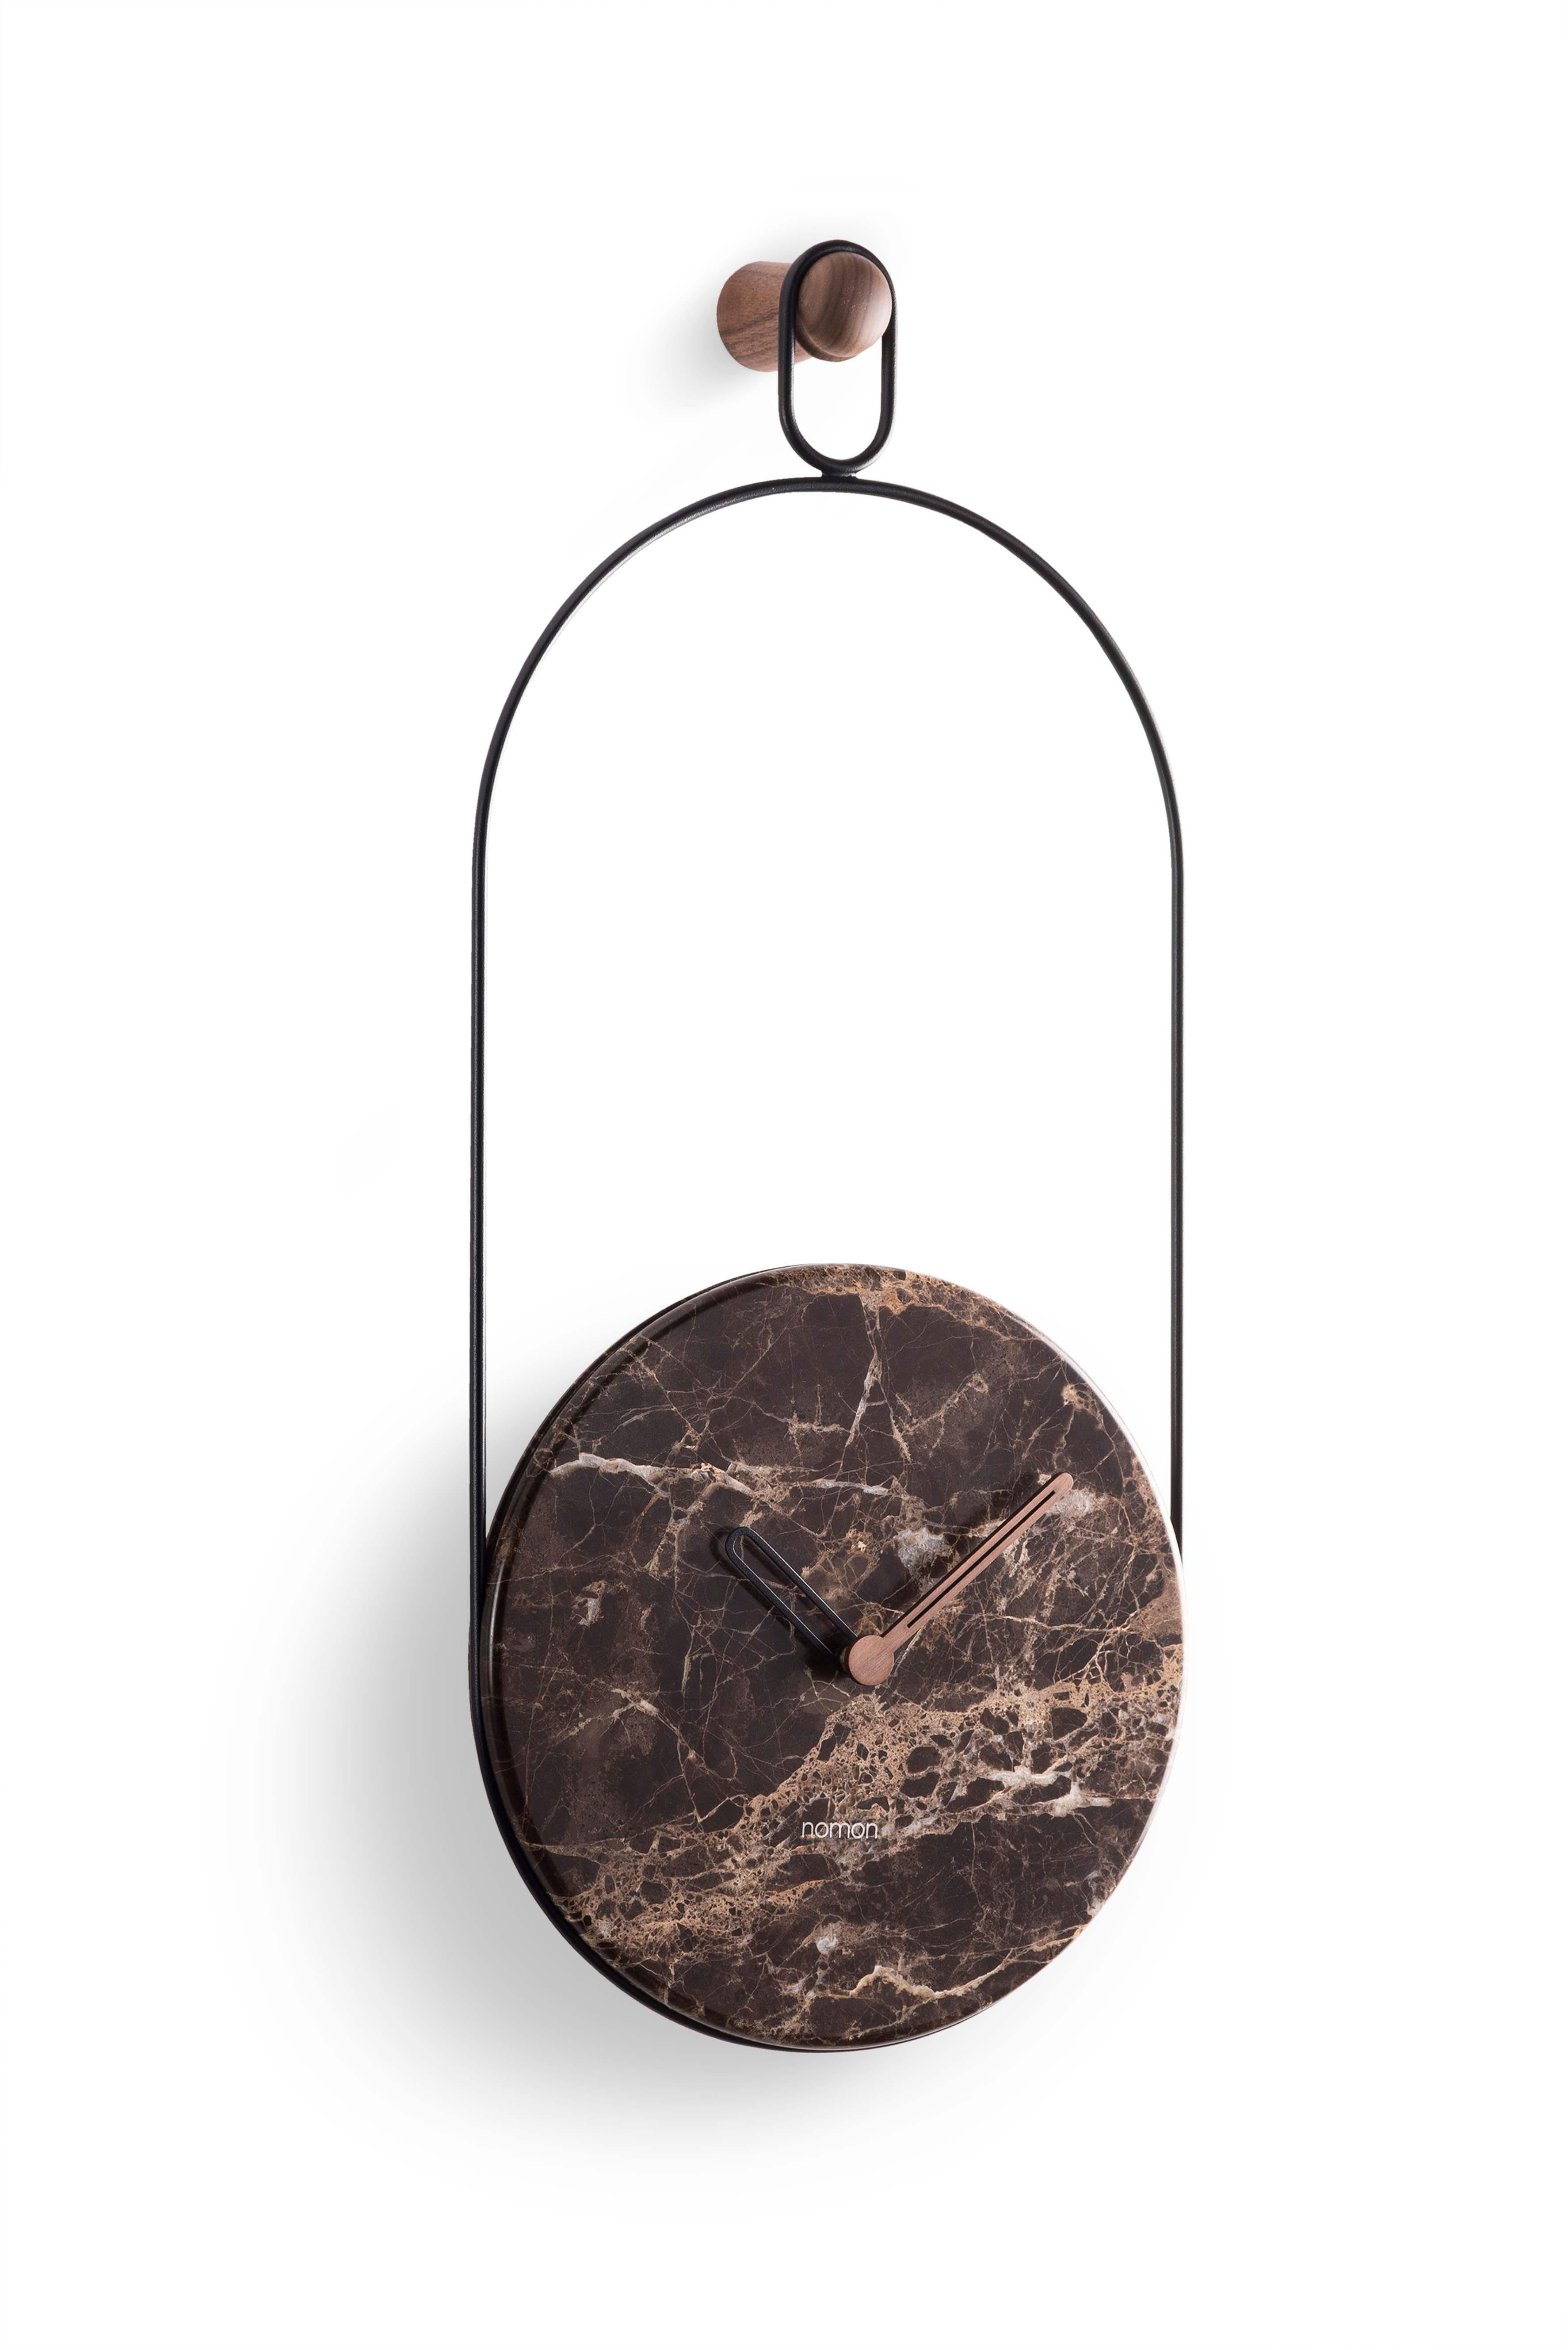 Brass Nomon Micro Eslabon Wall Clock  By Andres Martinez For Sale